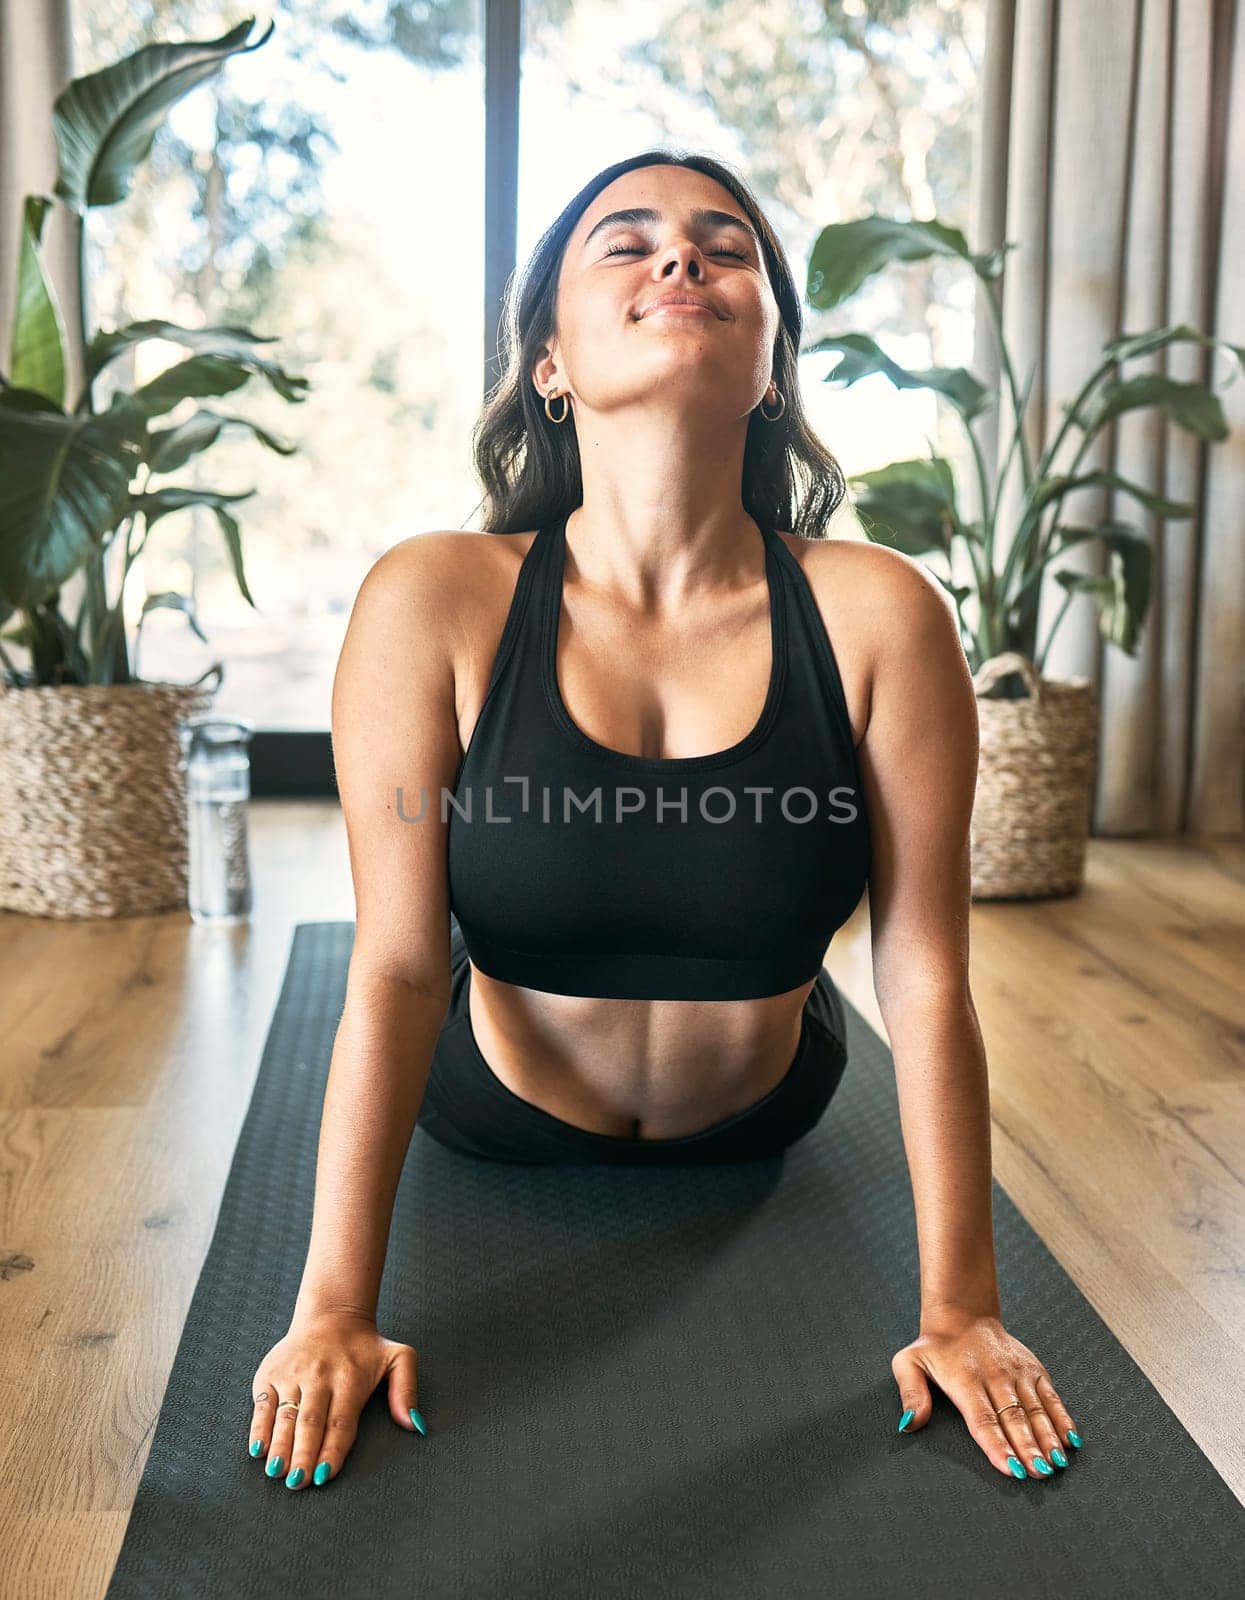 Yoga meditation, cobra stretch and woman in home for health, wellness and flexibility exercise. Pilates, workout and female yogi stretching, holistic training and exercising in house for fitness